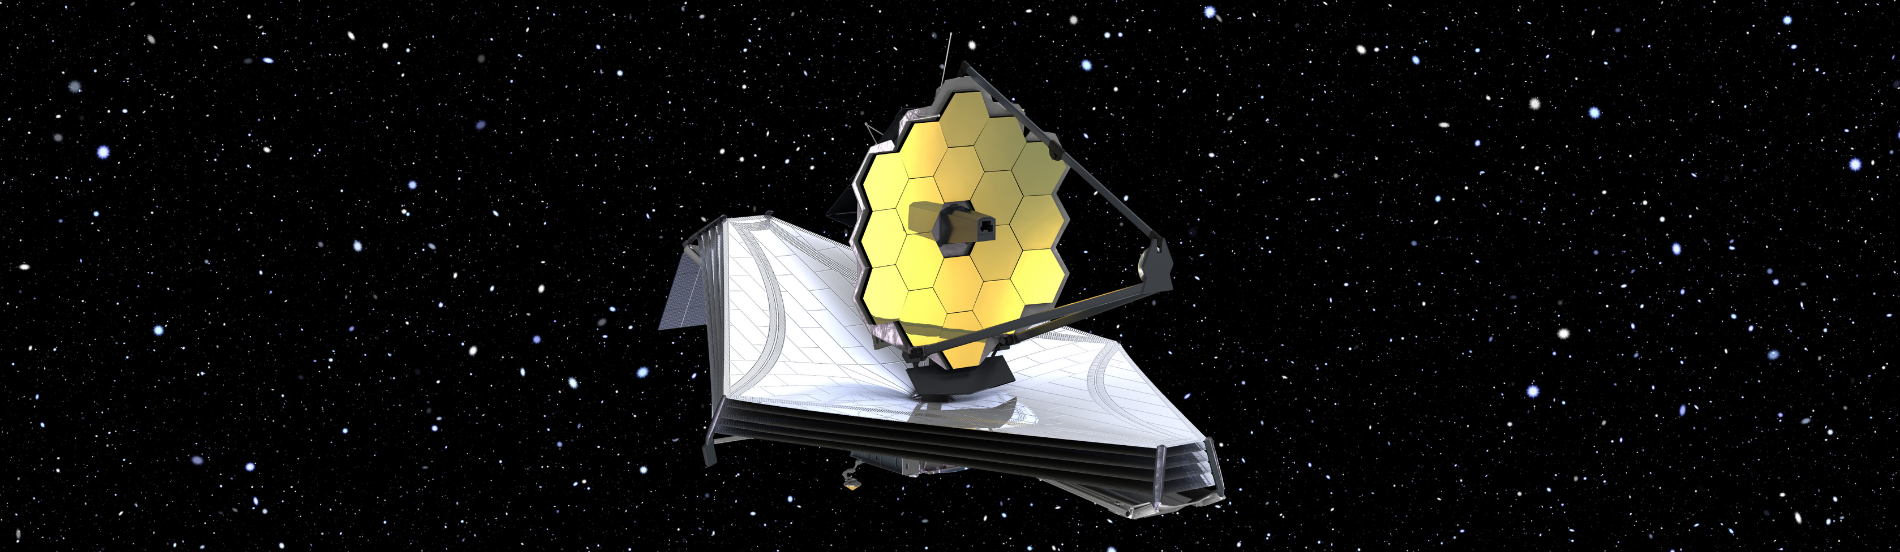 Criteria Labs Website Banner Image | FEBRUARY 1, 2022 PRESS RELEASE: CRITERIA LABS DELIVERS MMIC FLIGHT UNITS IN SUPPORT OF JAMES WEBB SPACE TELESCOPE MISSION